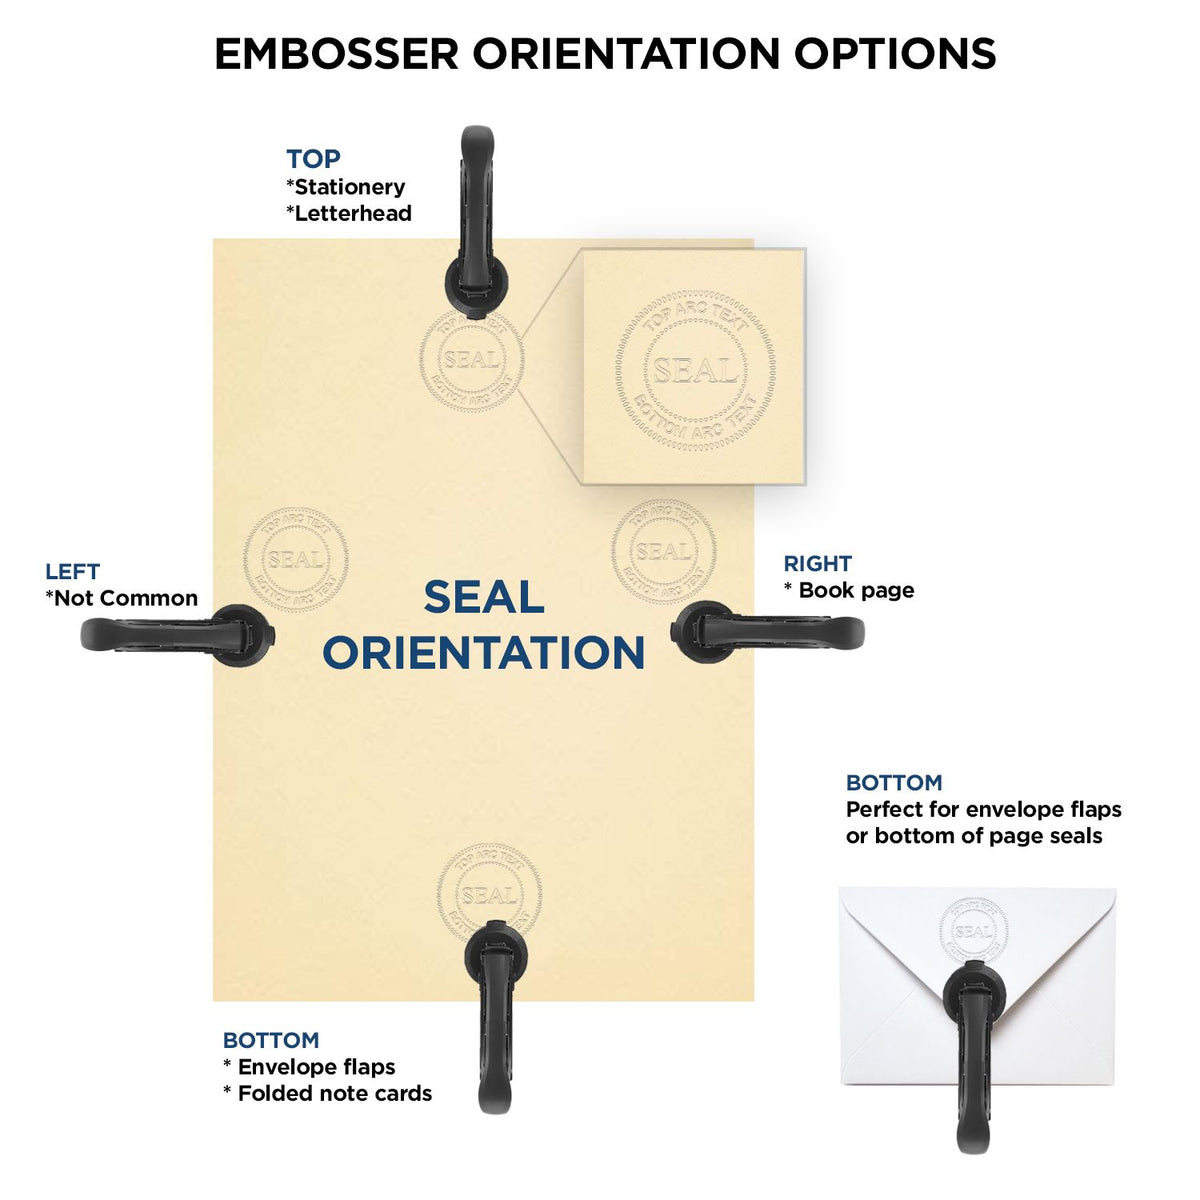 An infographic for the Handheld Arkansas Professional Geologist Embosser showing embosser orientation, this is showing examples of a top, bottom, right and left insert.